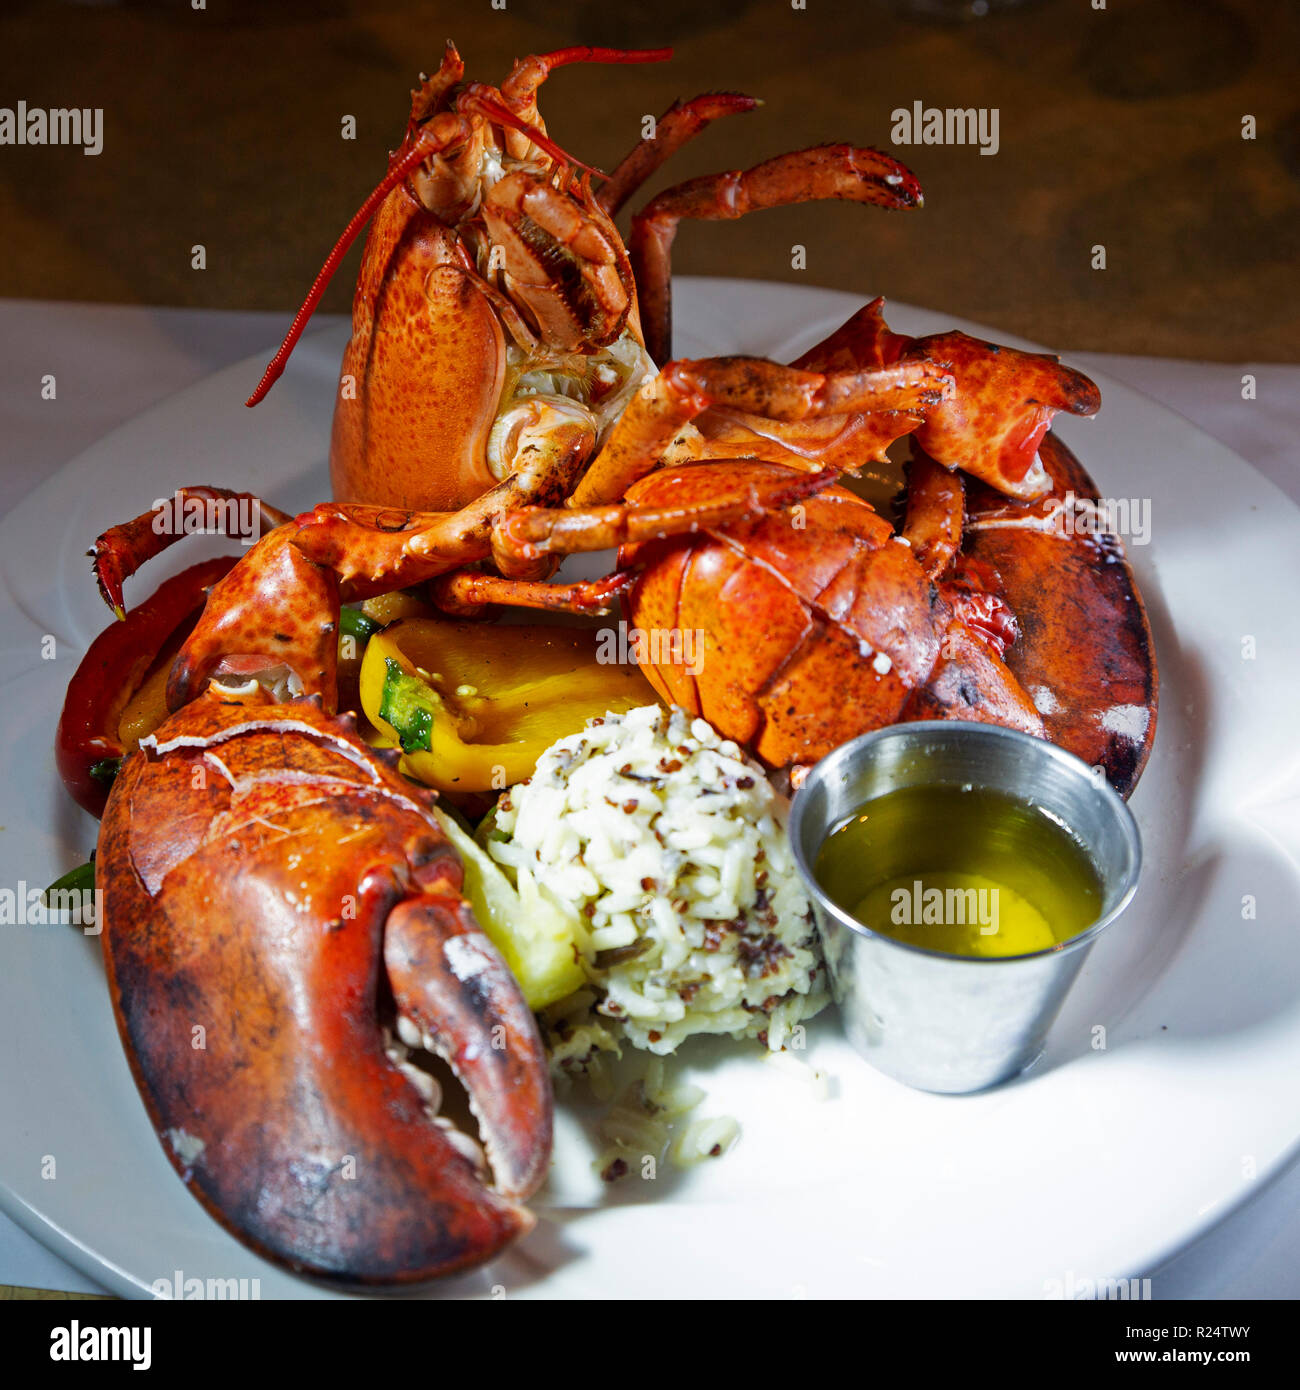 Lobster served in Canada. It is served accompanied by rice and a butter sauce. Stock Photo